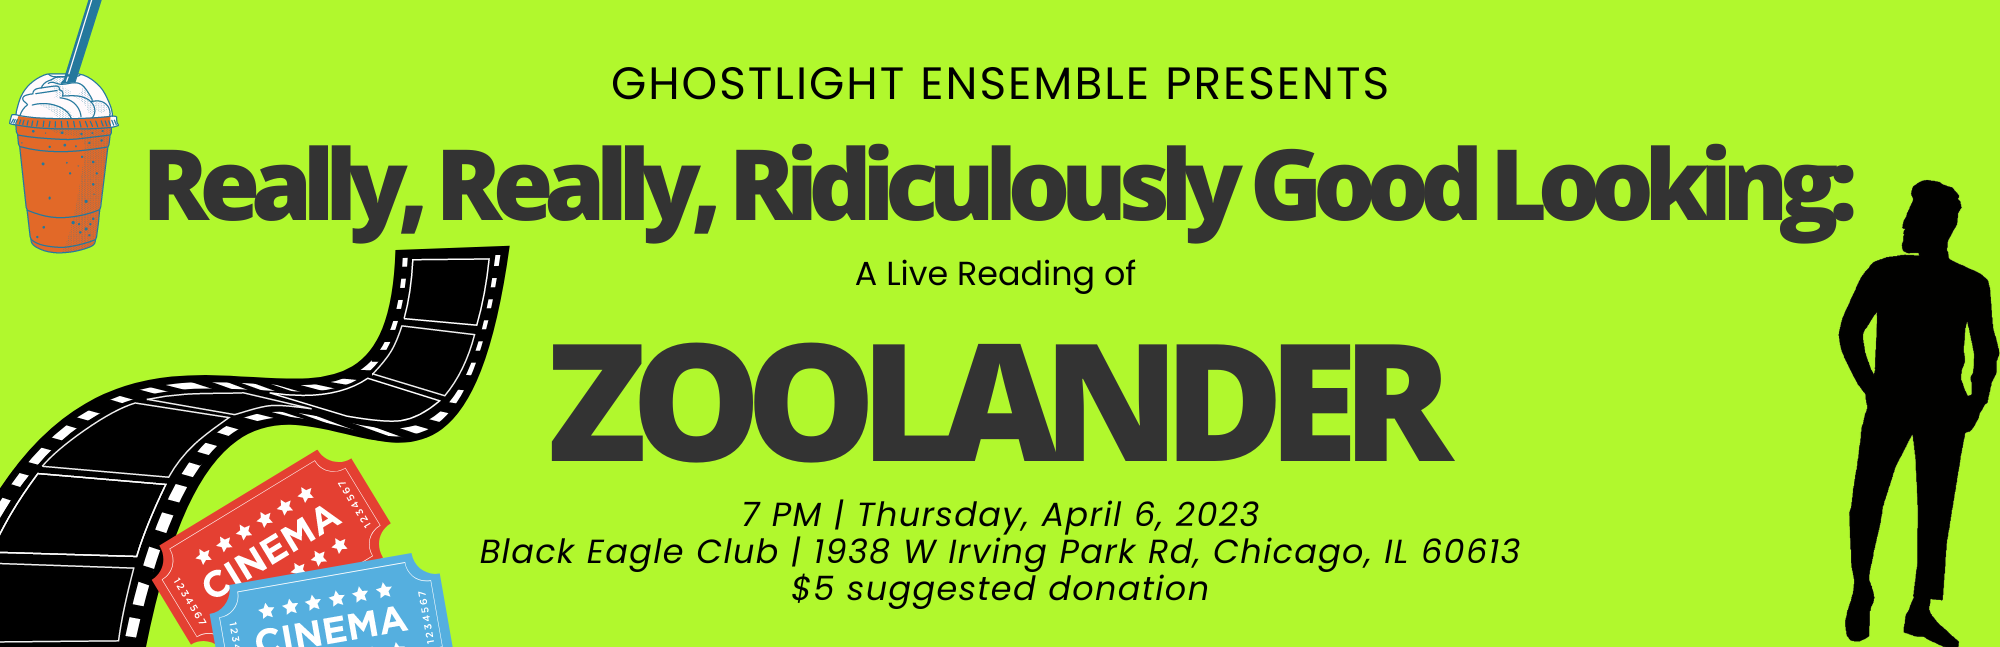 Really, Really, Ridiculously Good Looking: A Live Reading of Zoolander